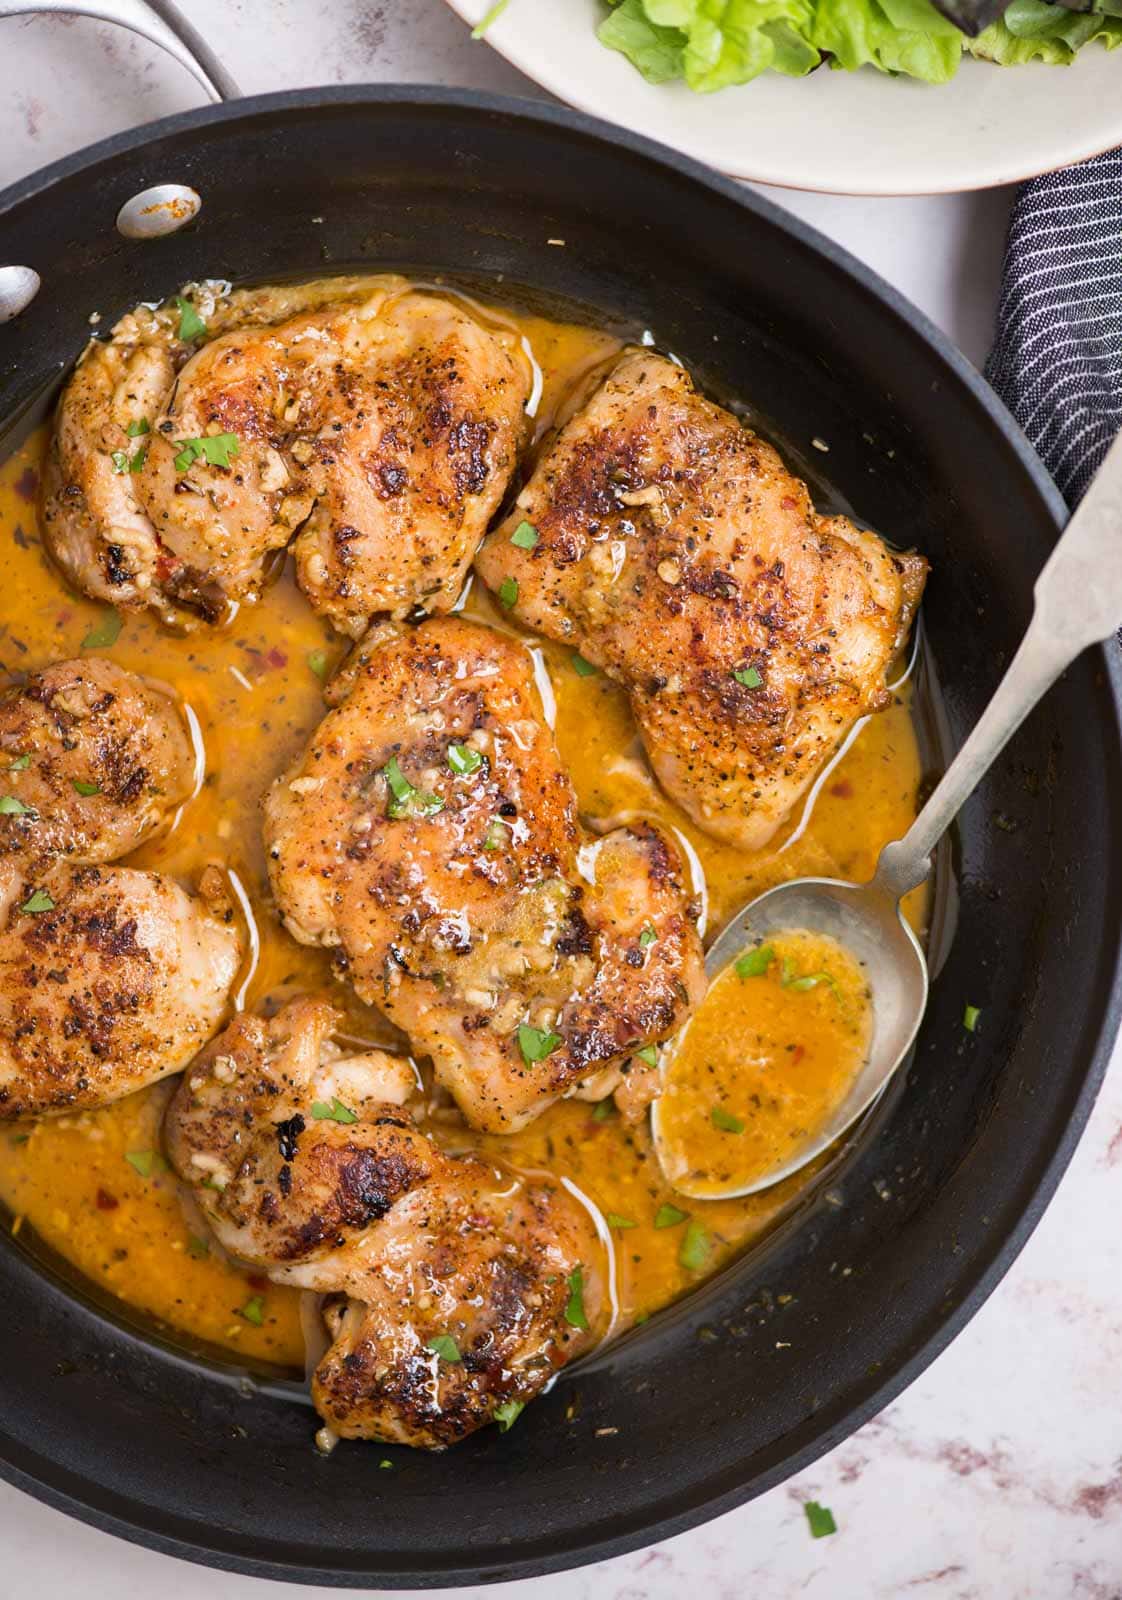 Juicy tender Boneless skinless chicken thighs in butter garlic sauce is crazy delicious. The garlic butter sauce has no cream, no flour yet is so creamy. Make this easy dinner on the stovetop in just 30 minutes. 